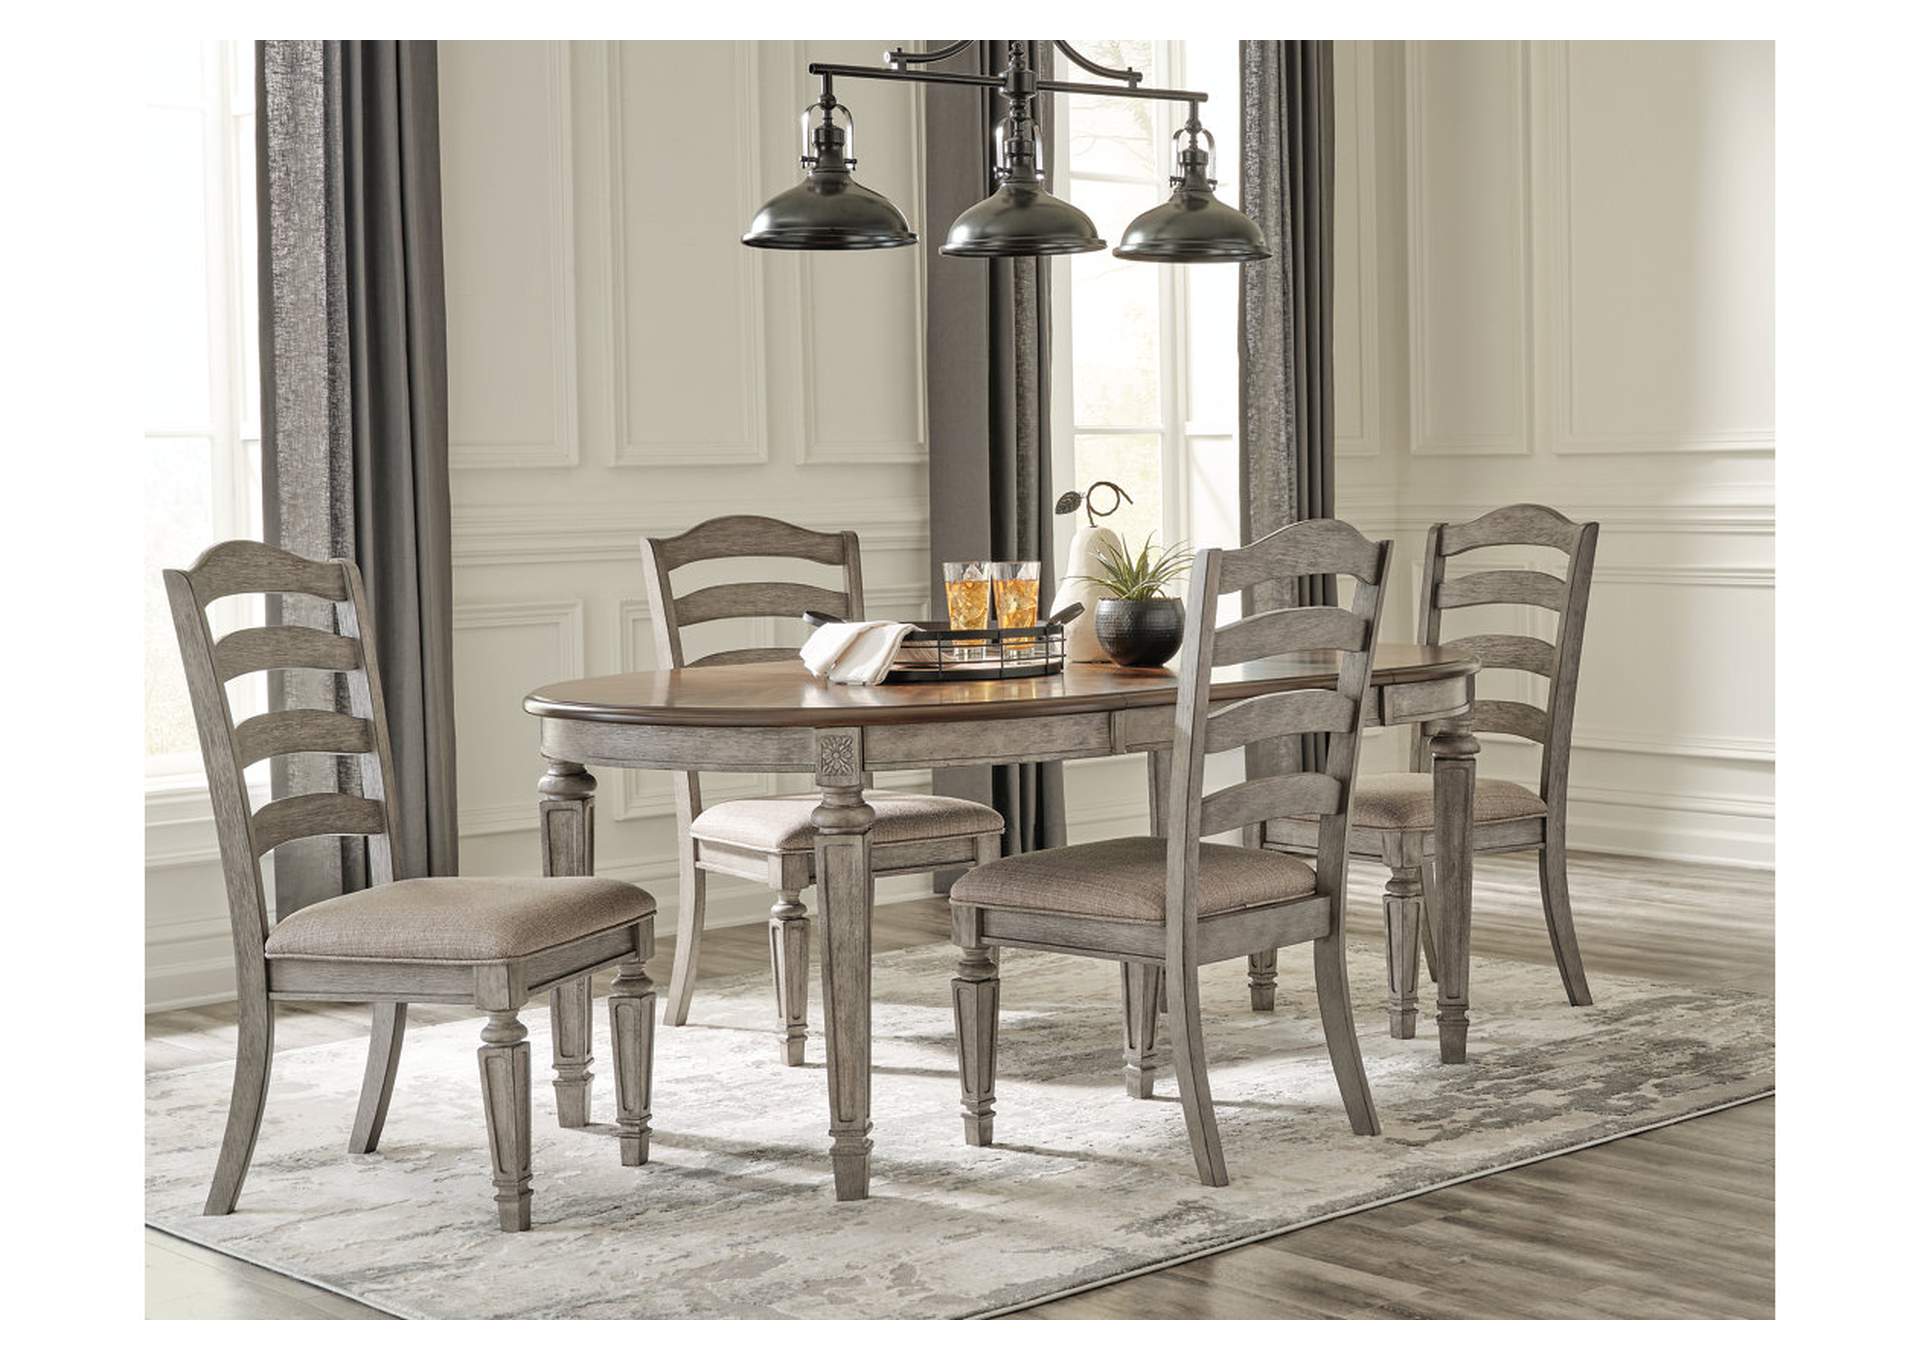 Lodenbay Dining Table and 4 Chairs with Storage,Signature Design By Ashley